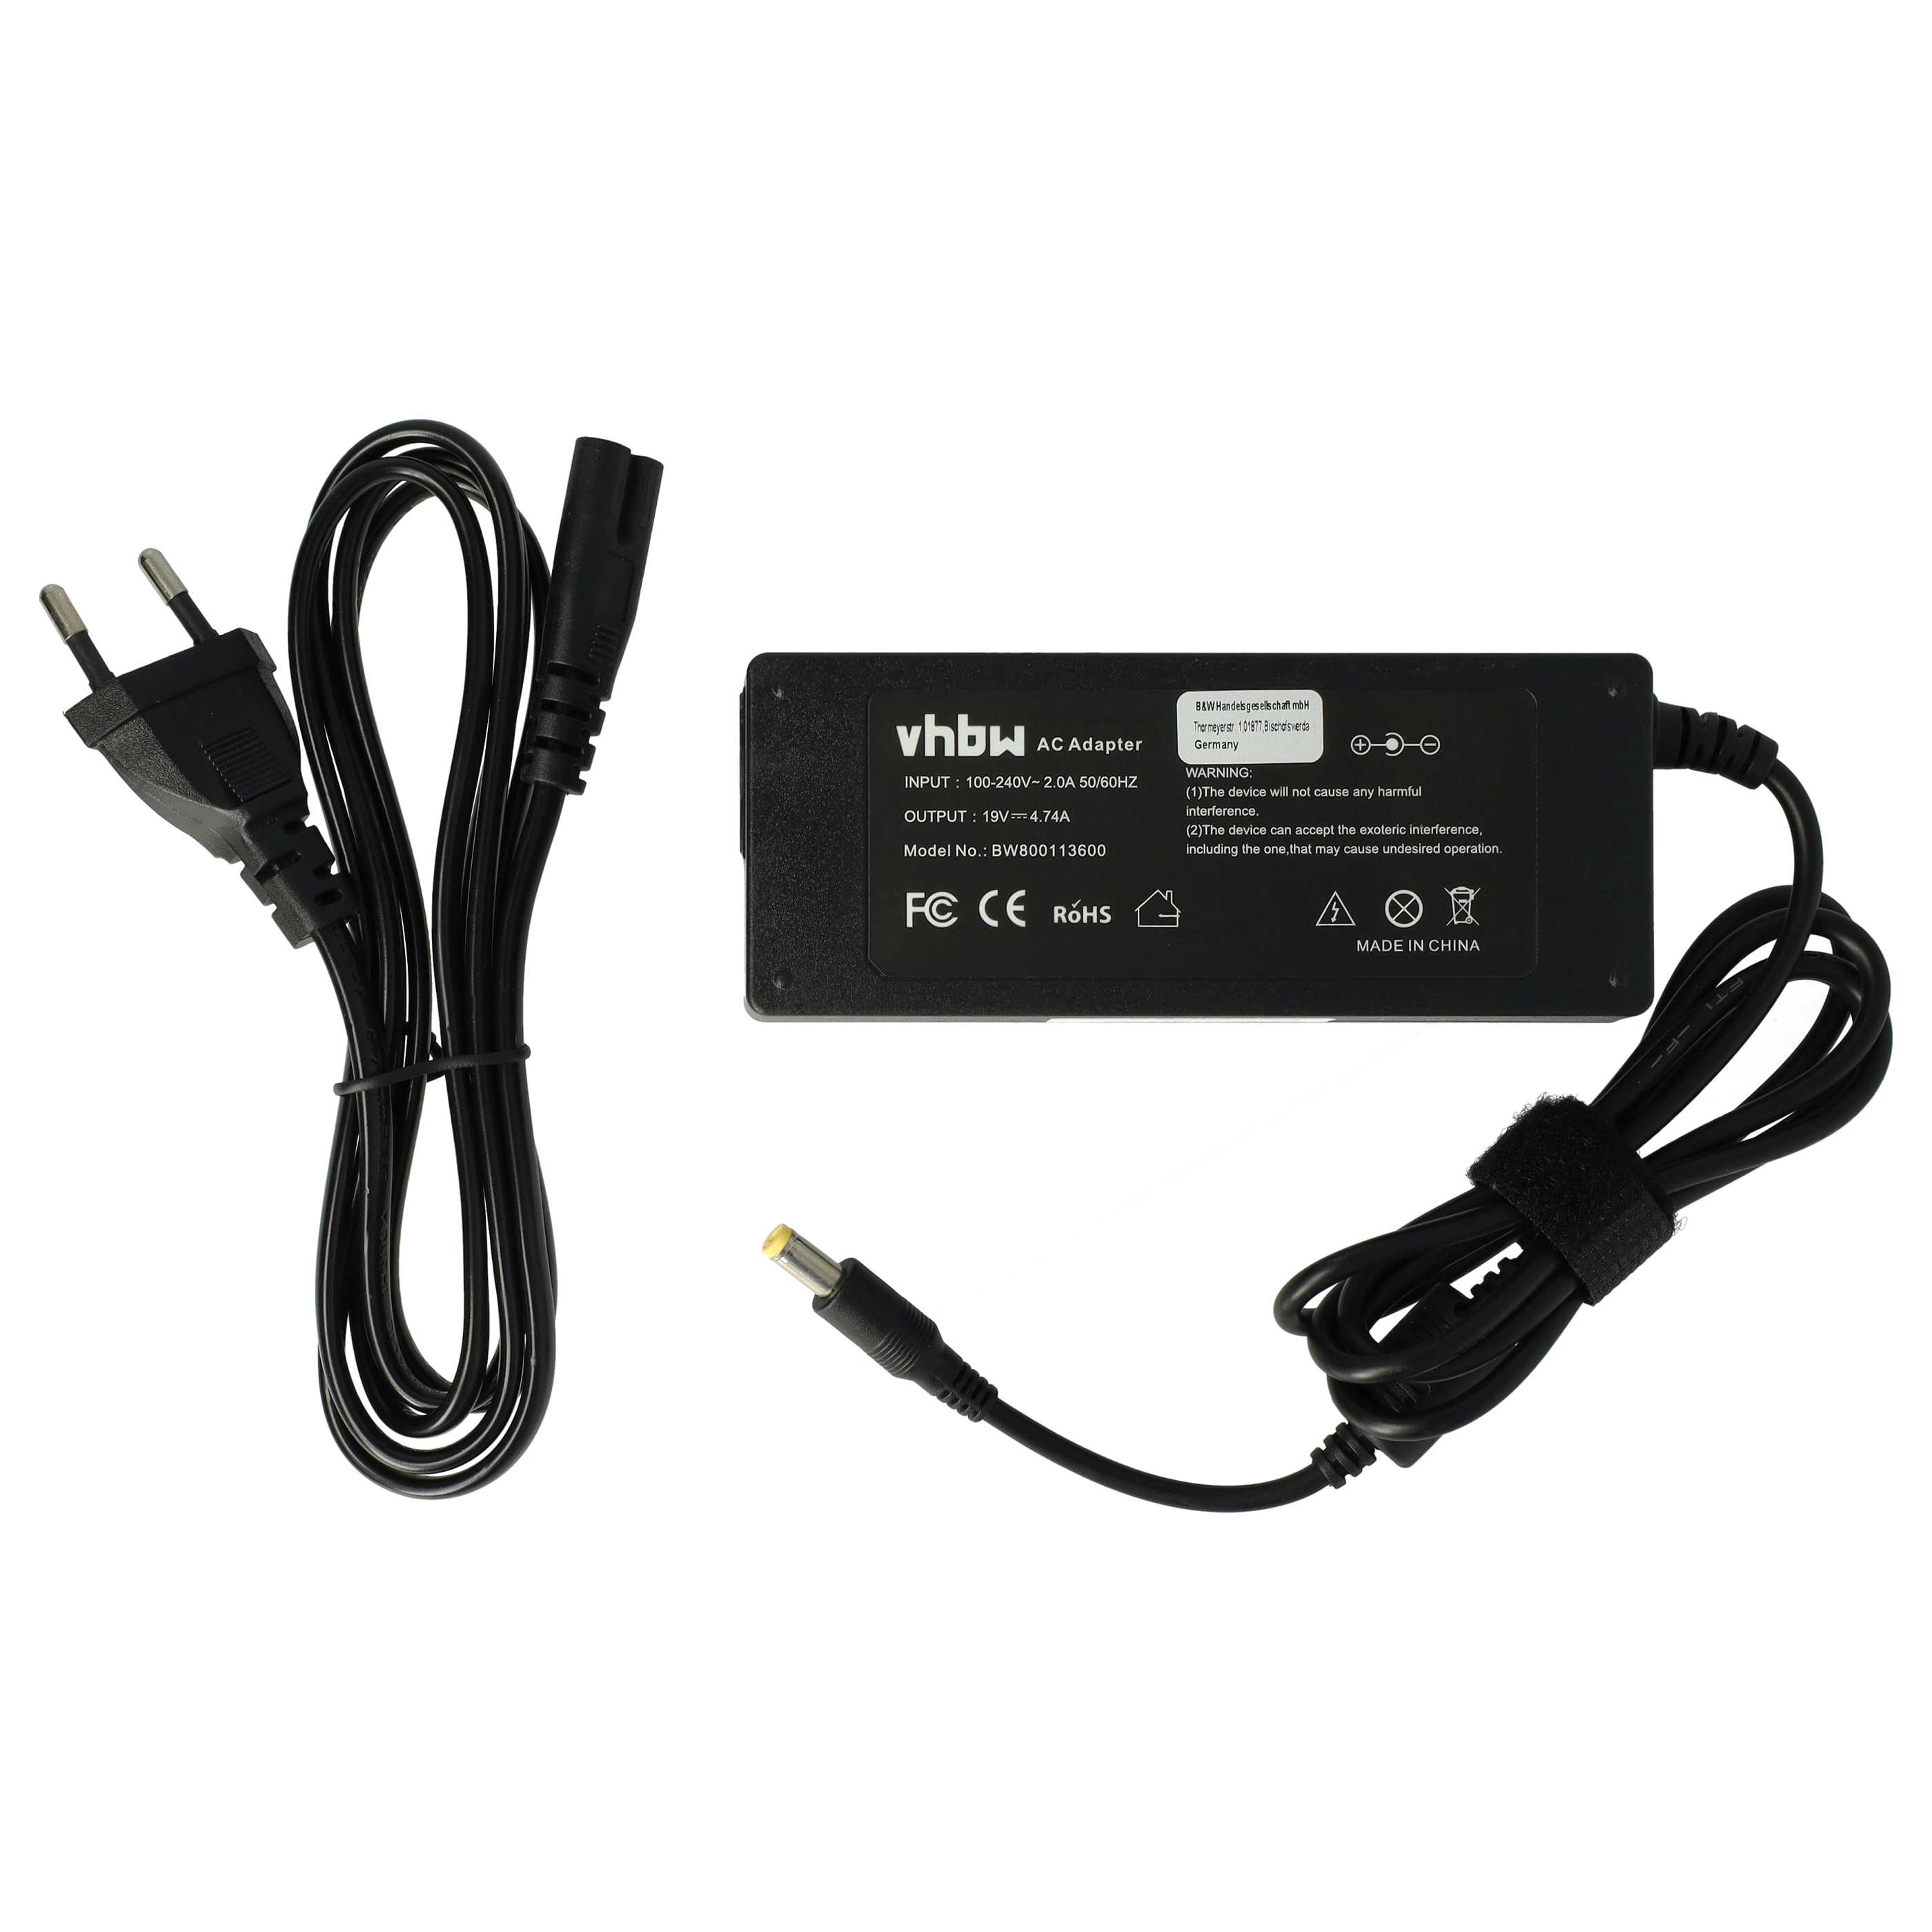 Mains Power Adapter replaces Acer 91.41Q28.002, 91.46W28.002, 91.42S28.002 for ToshibaNotebook etc., 90 W